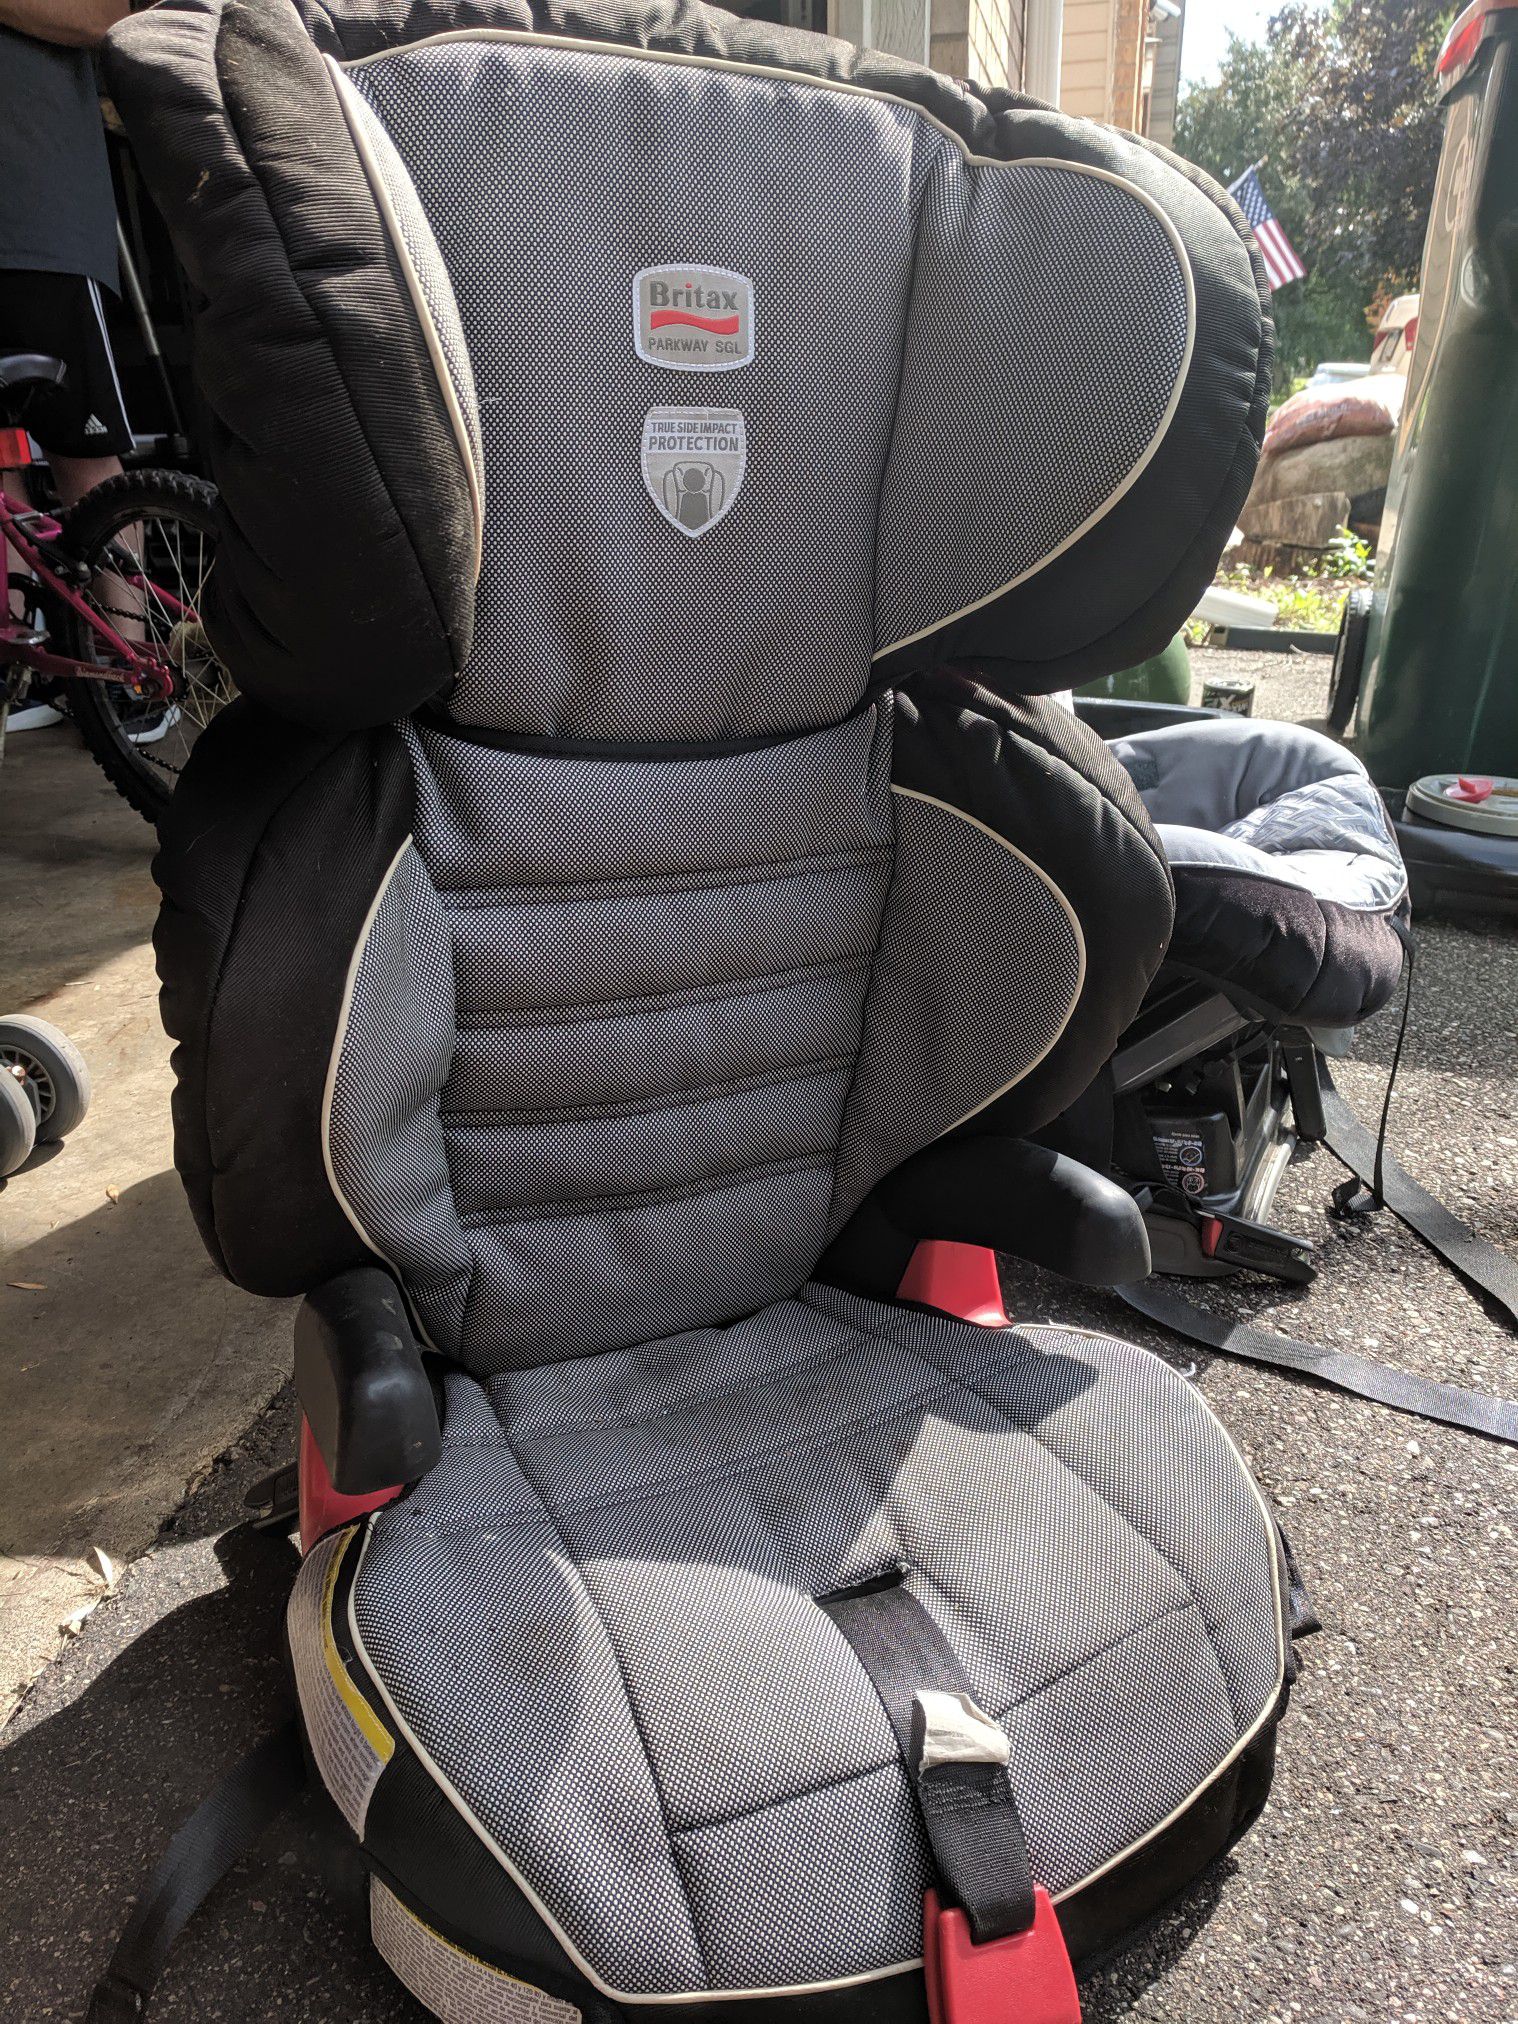 Britax Parkway SGL carseat booster